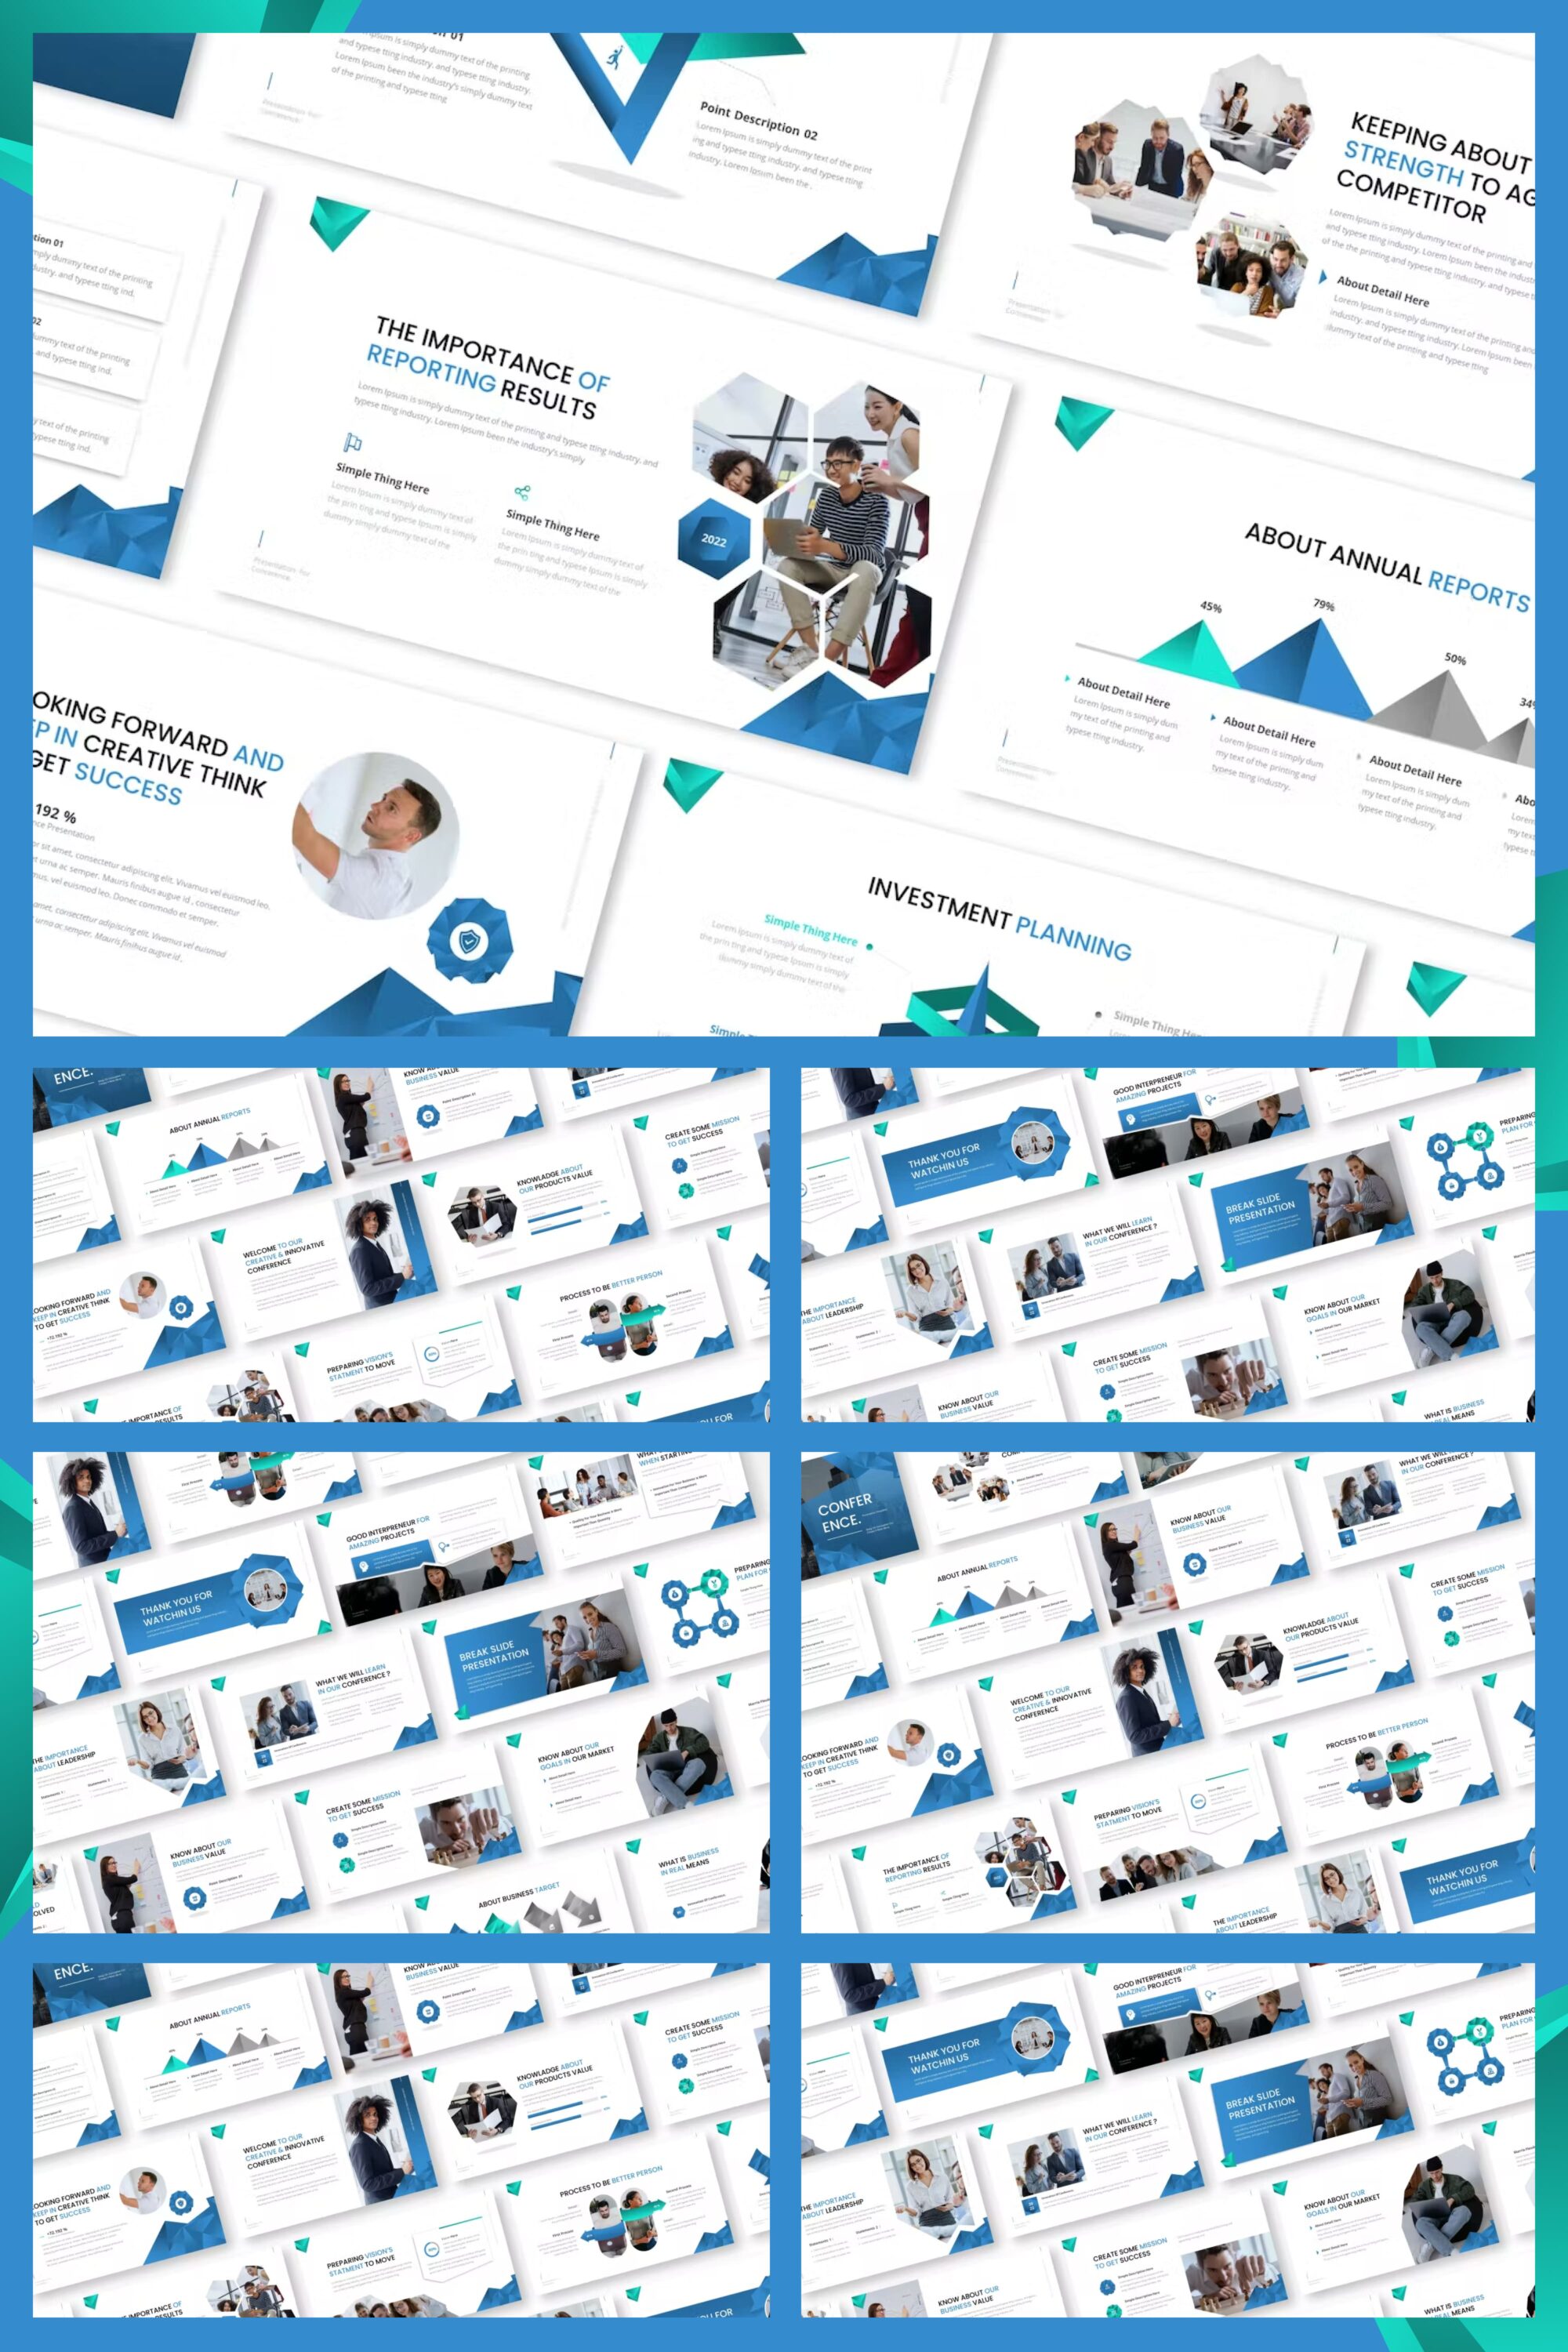 Conference powerpoint presentation template of pinterest.